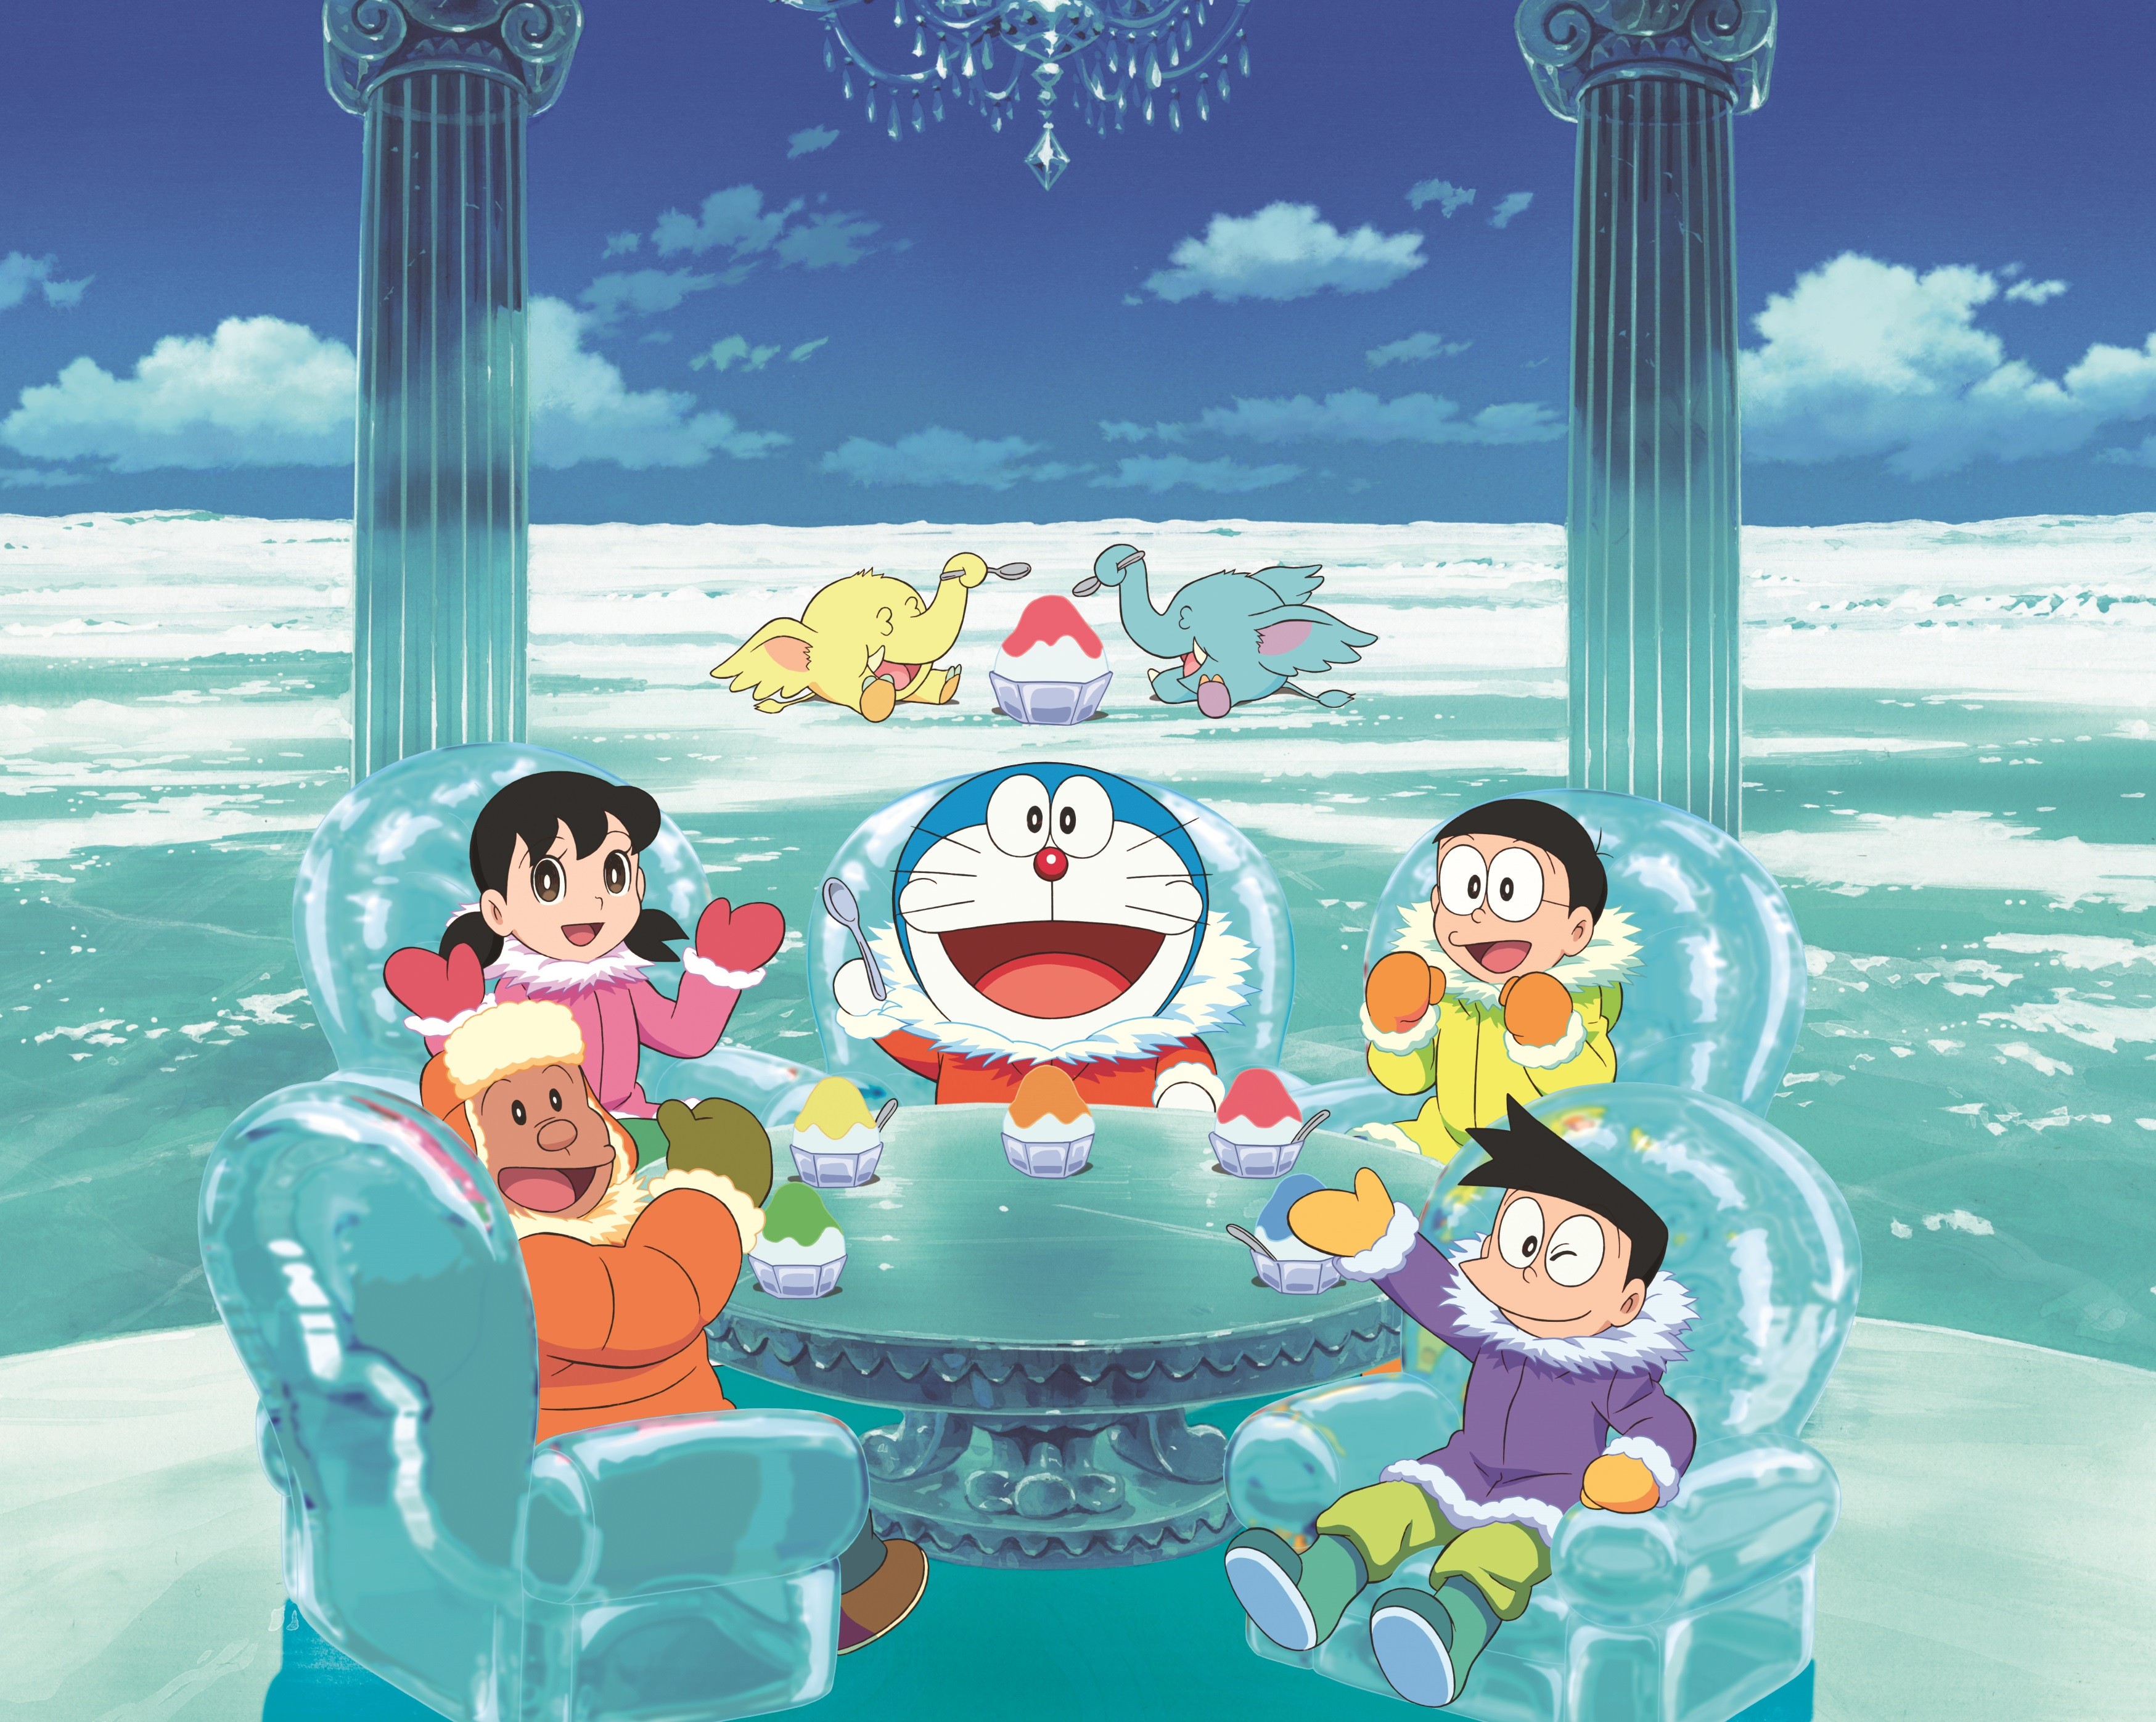 Doraemon's new adventure takes place in the South Pacific [Review] - YP |  South China Morning Post